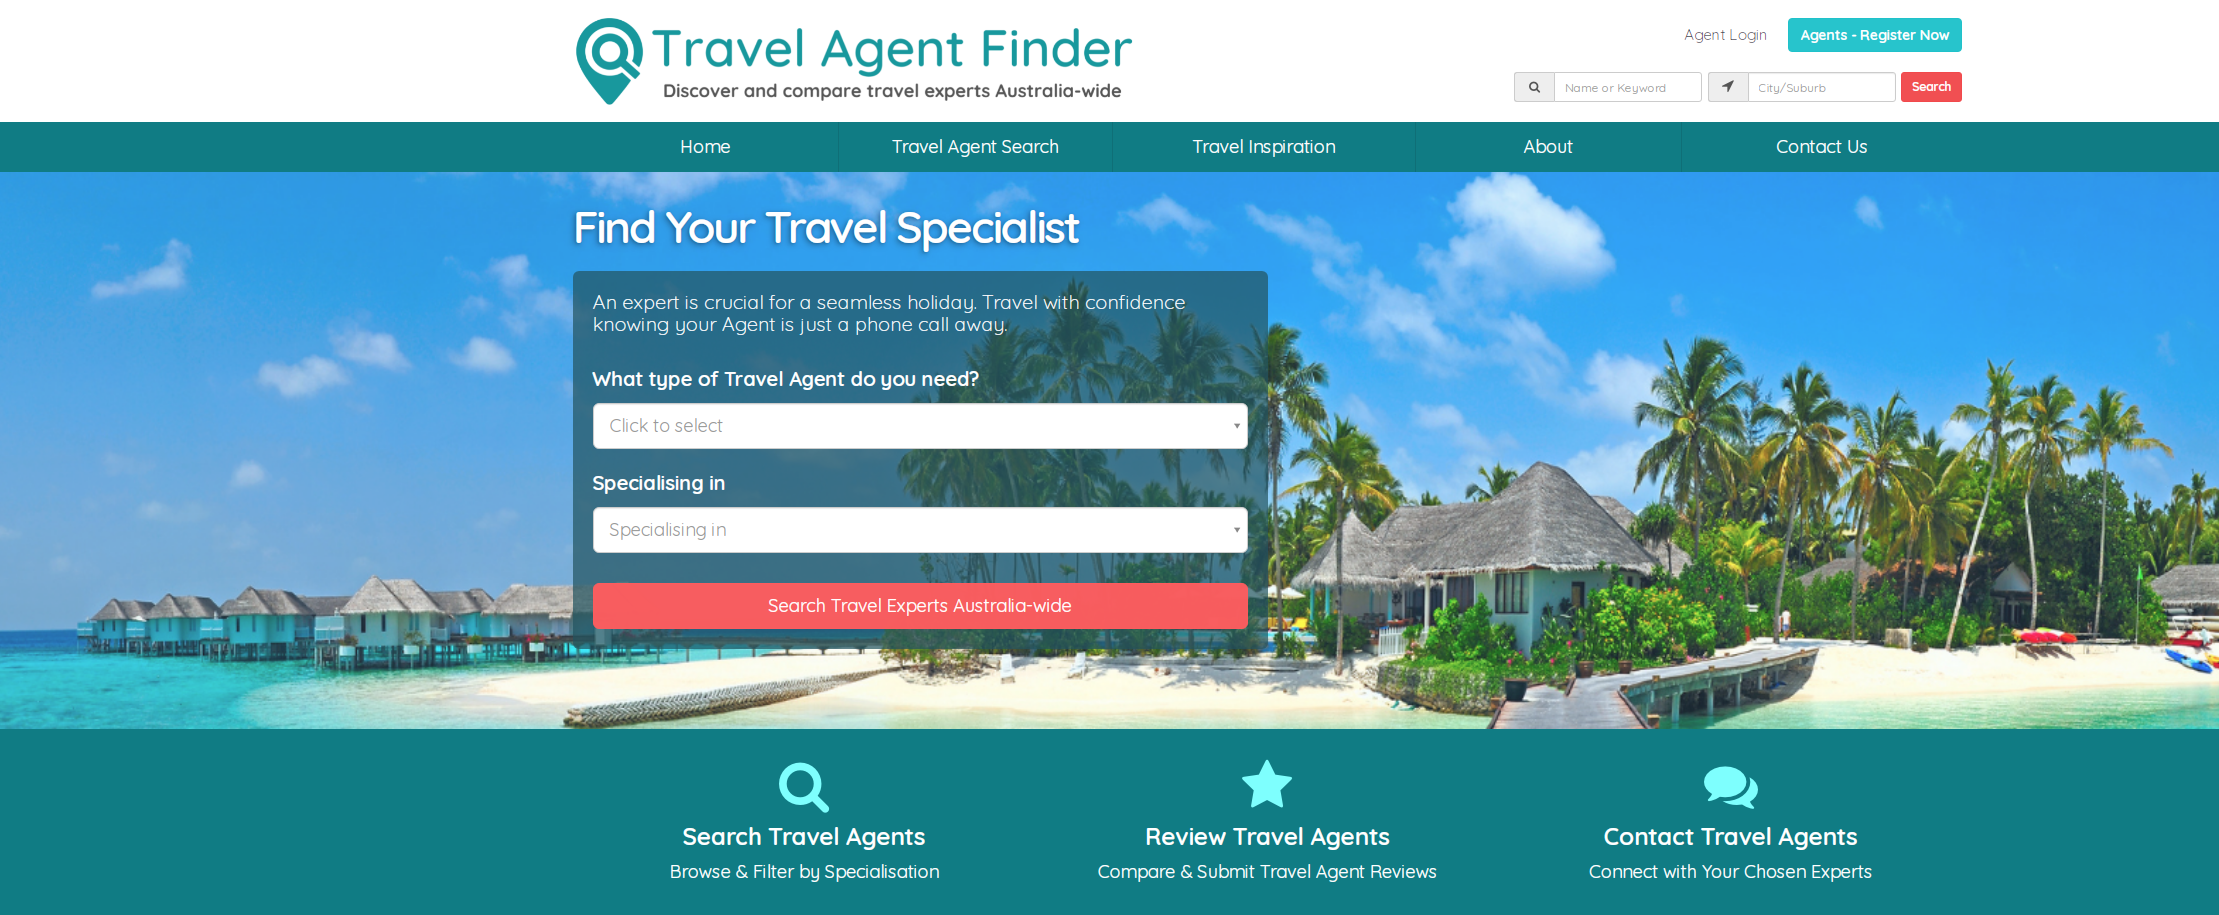 Update your Travel Agent Finder profile for the chance at a cruise spot – Travel Weekly